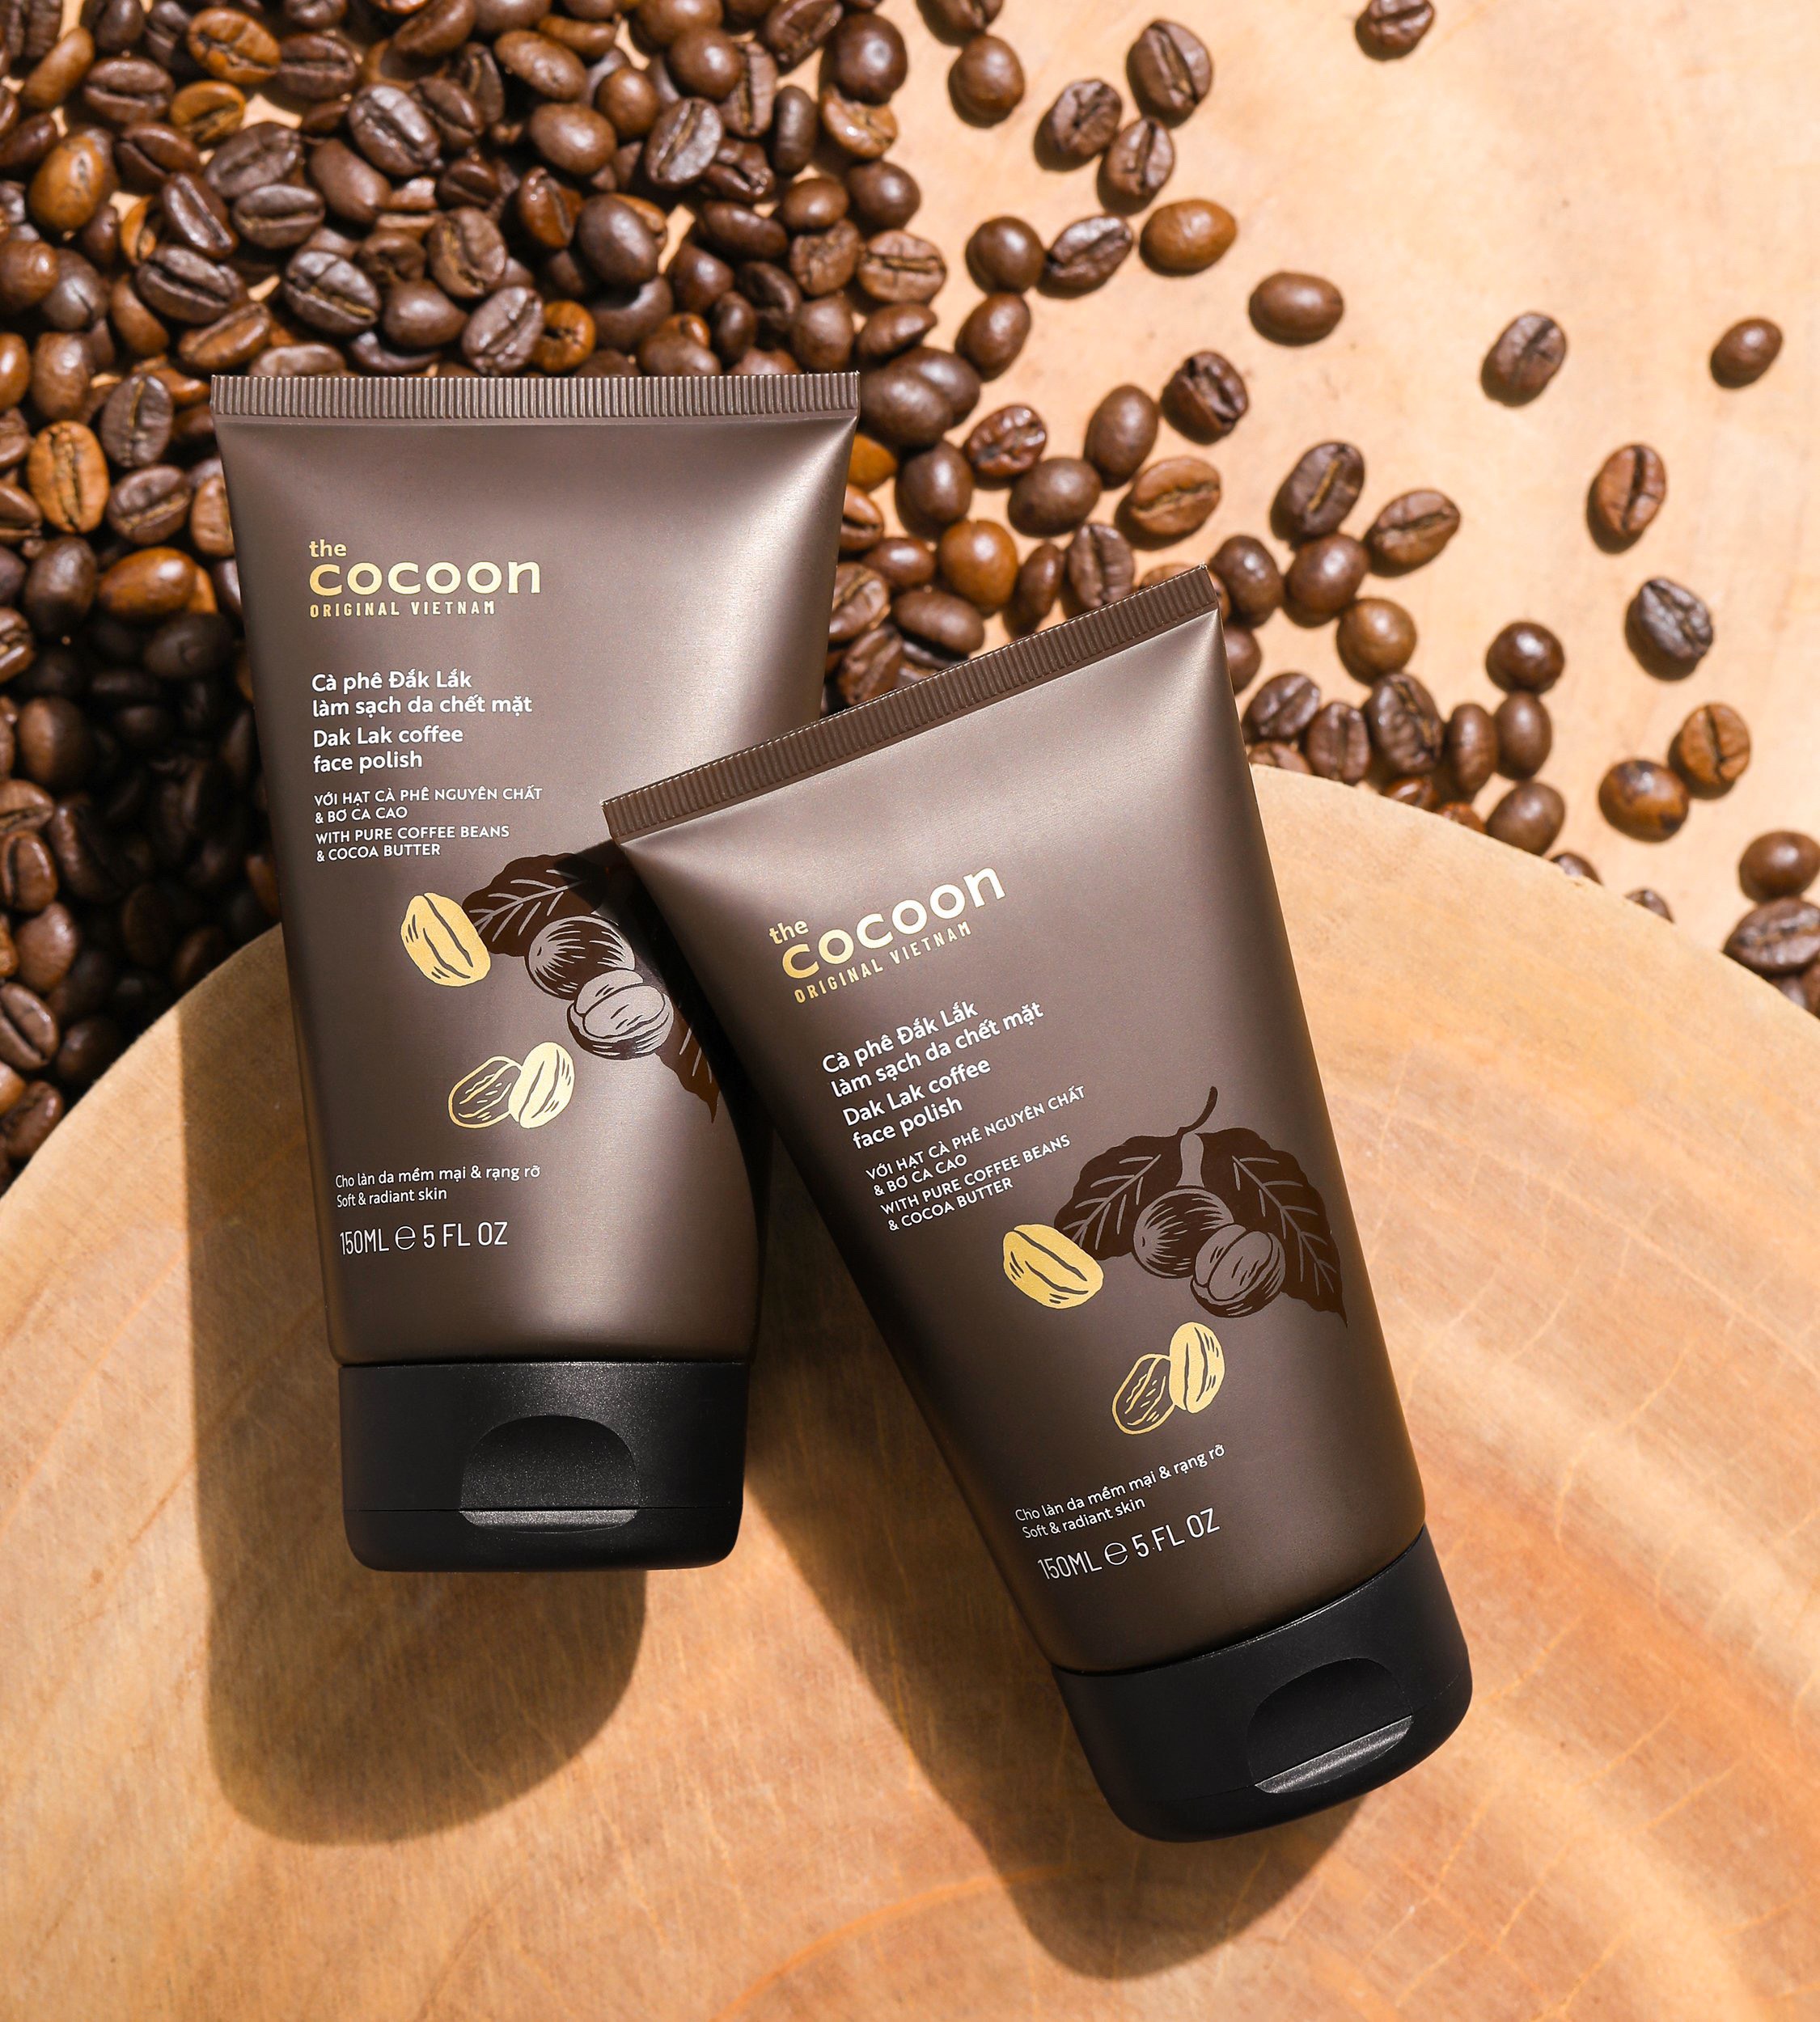 Cocoon Face Polish Dak Lak Coffee And Cocoa Butter For Soft And Radiant Skin 150ml